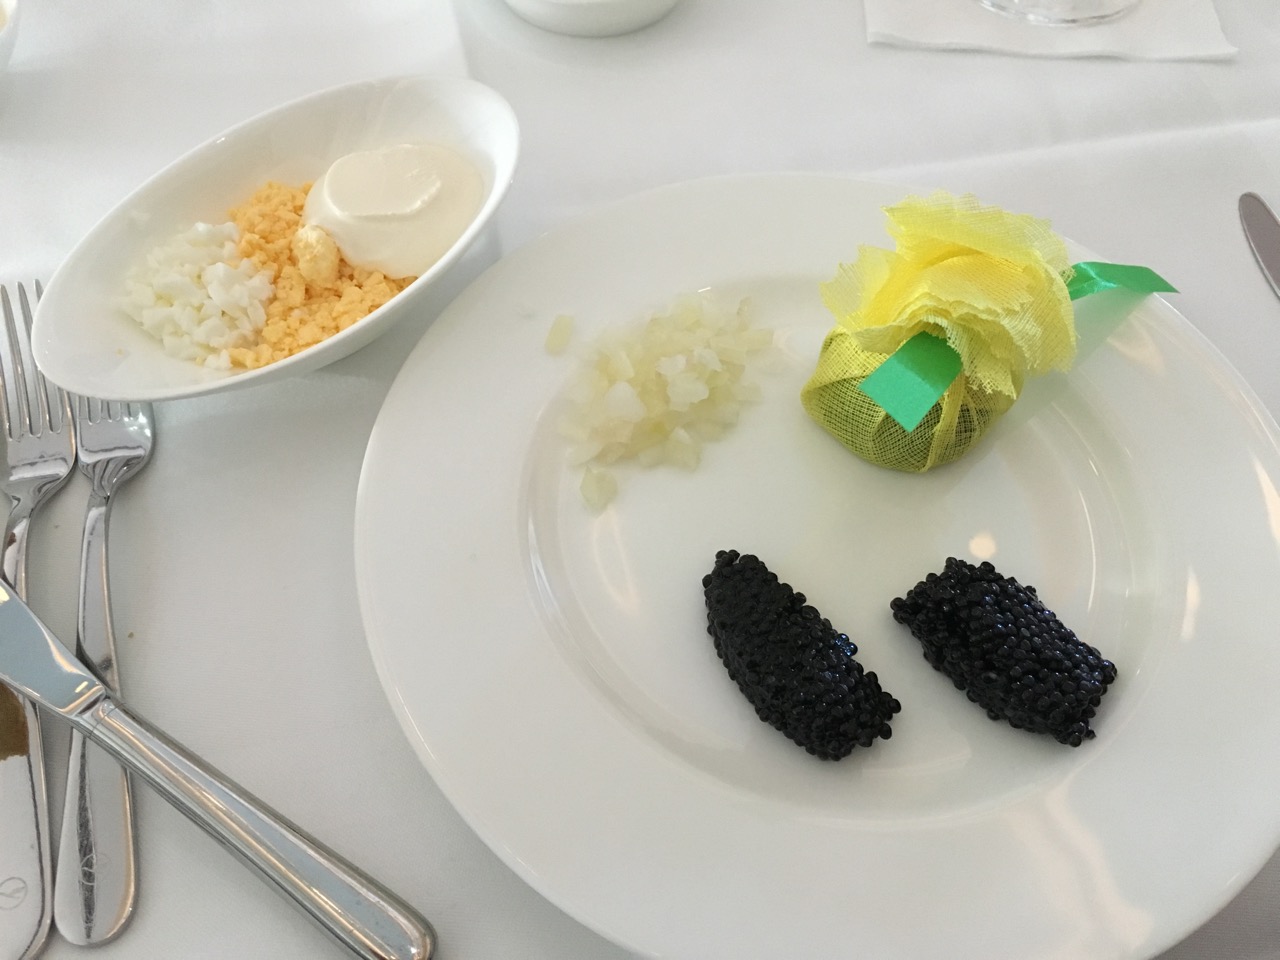 LH First Class Caviar with the traditional Garnishes